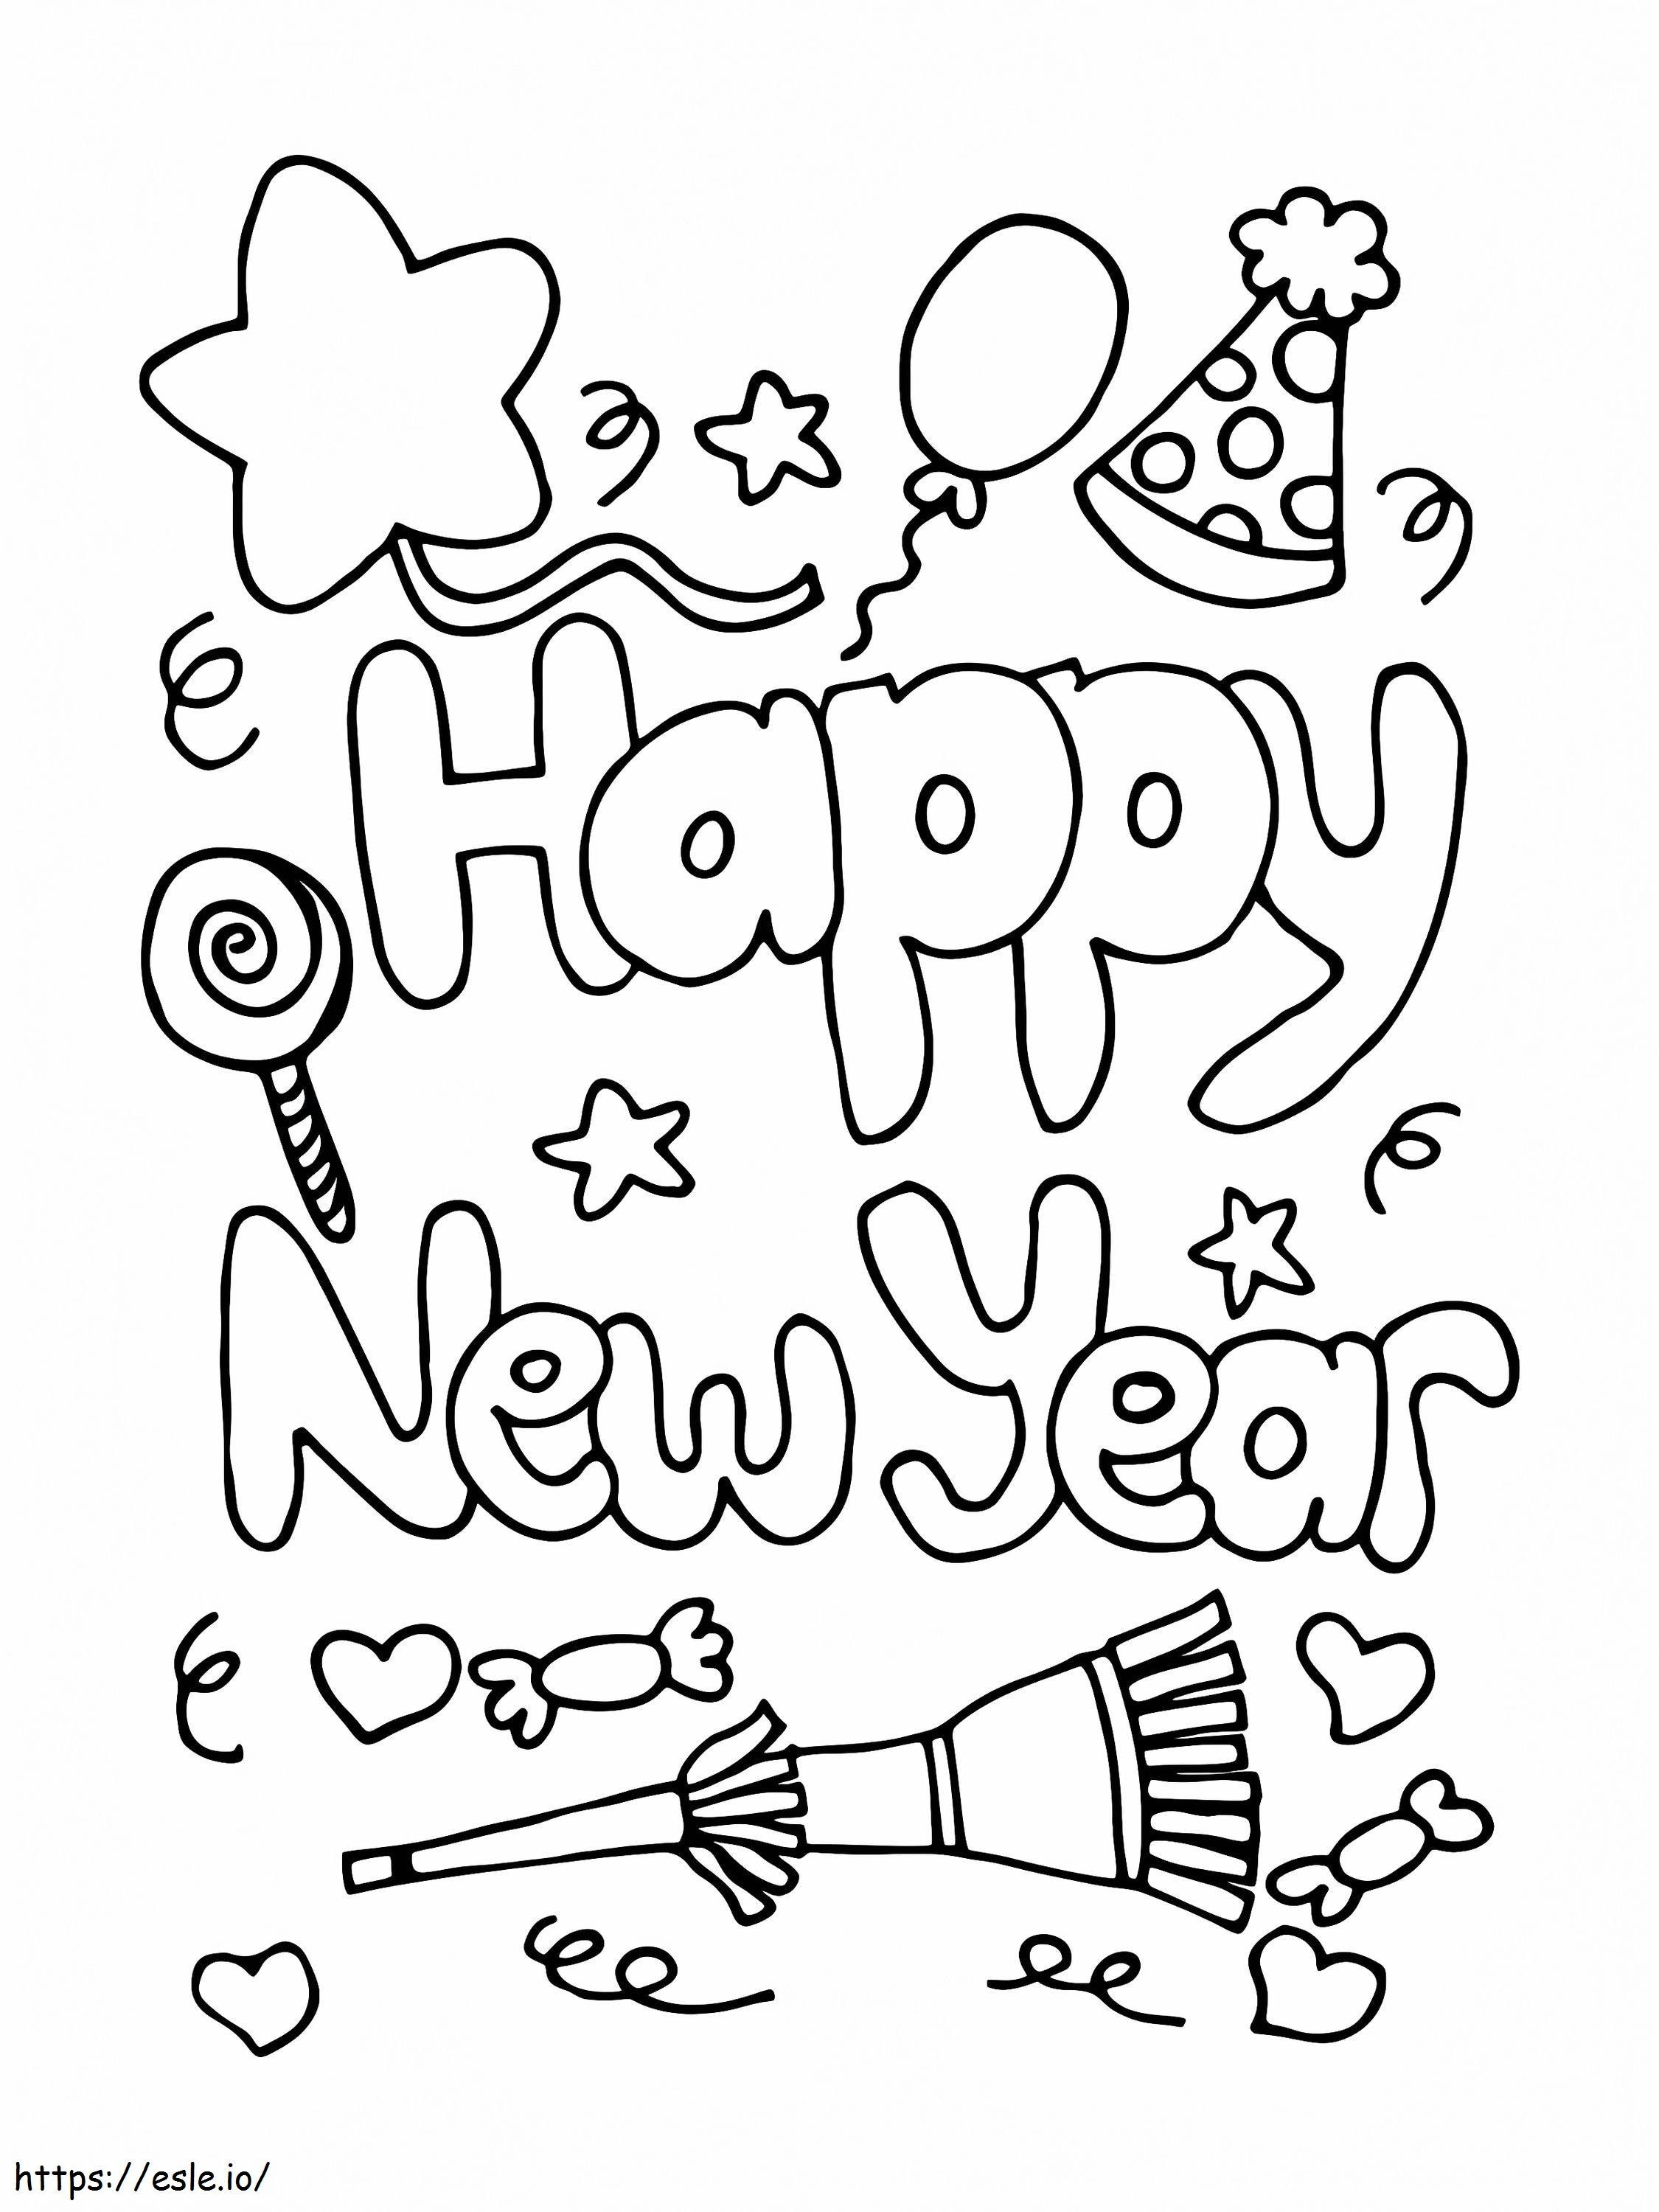 Happy New Year Coloring 4 coloring page